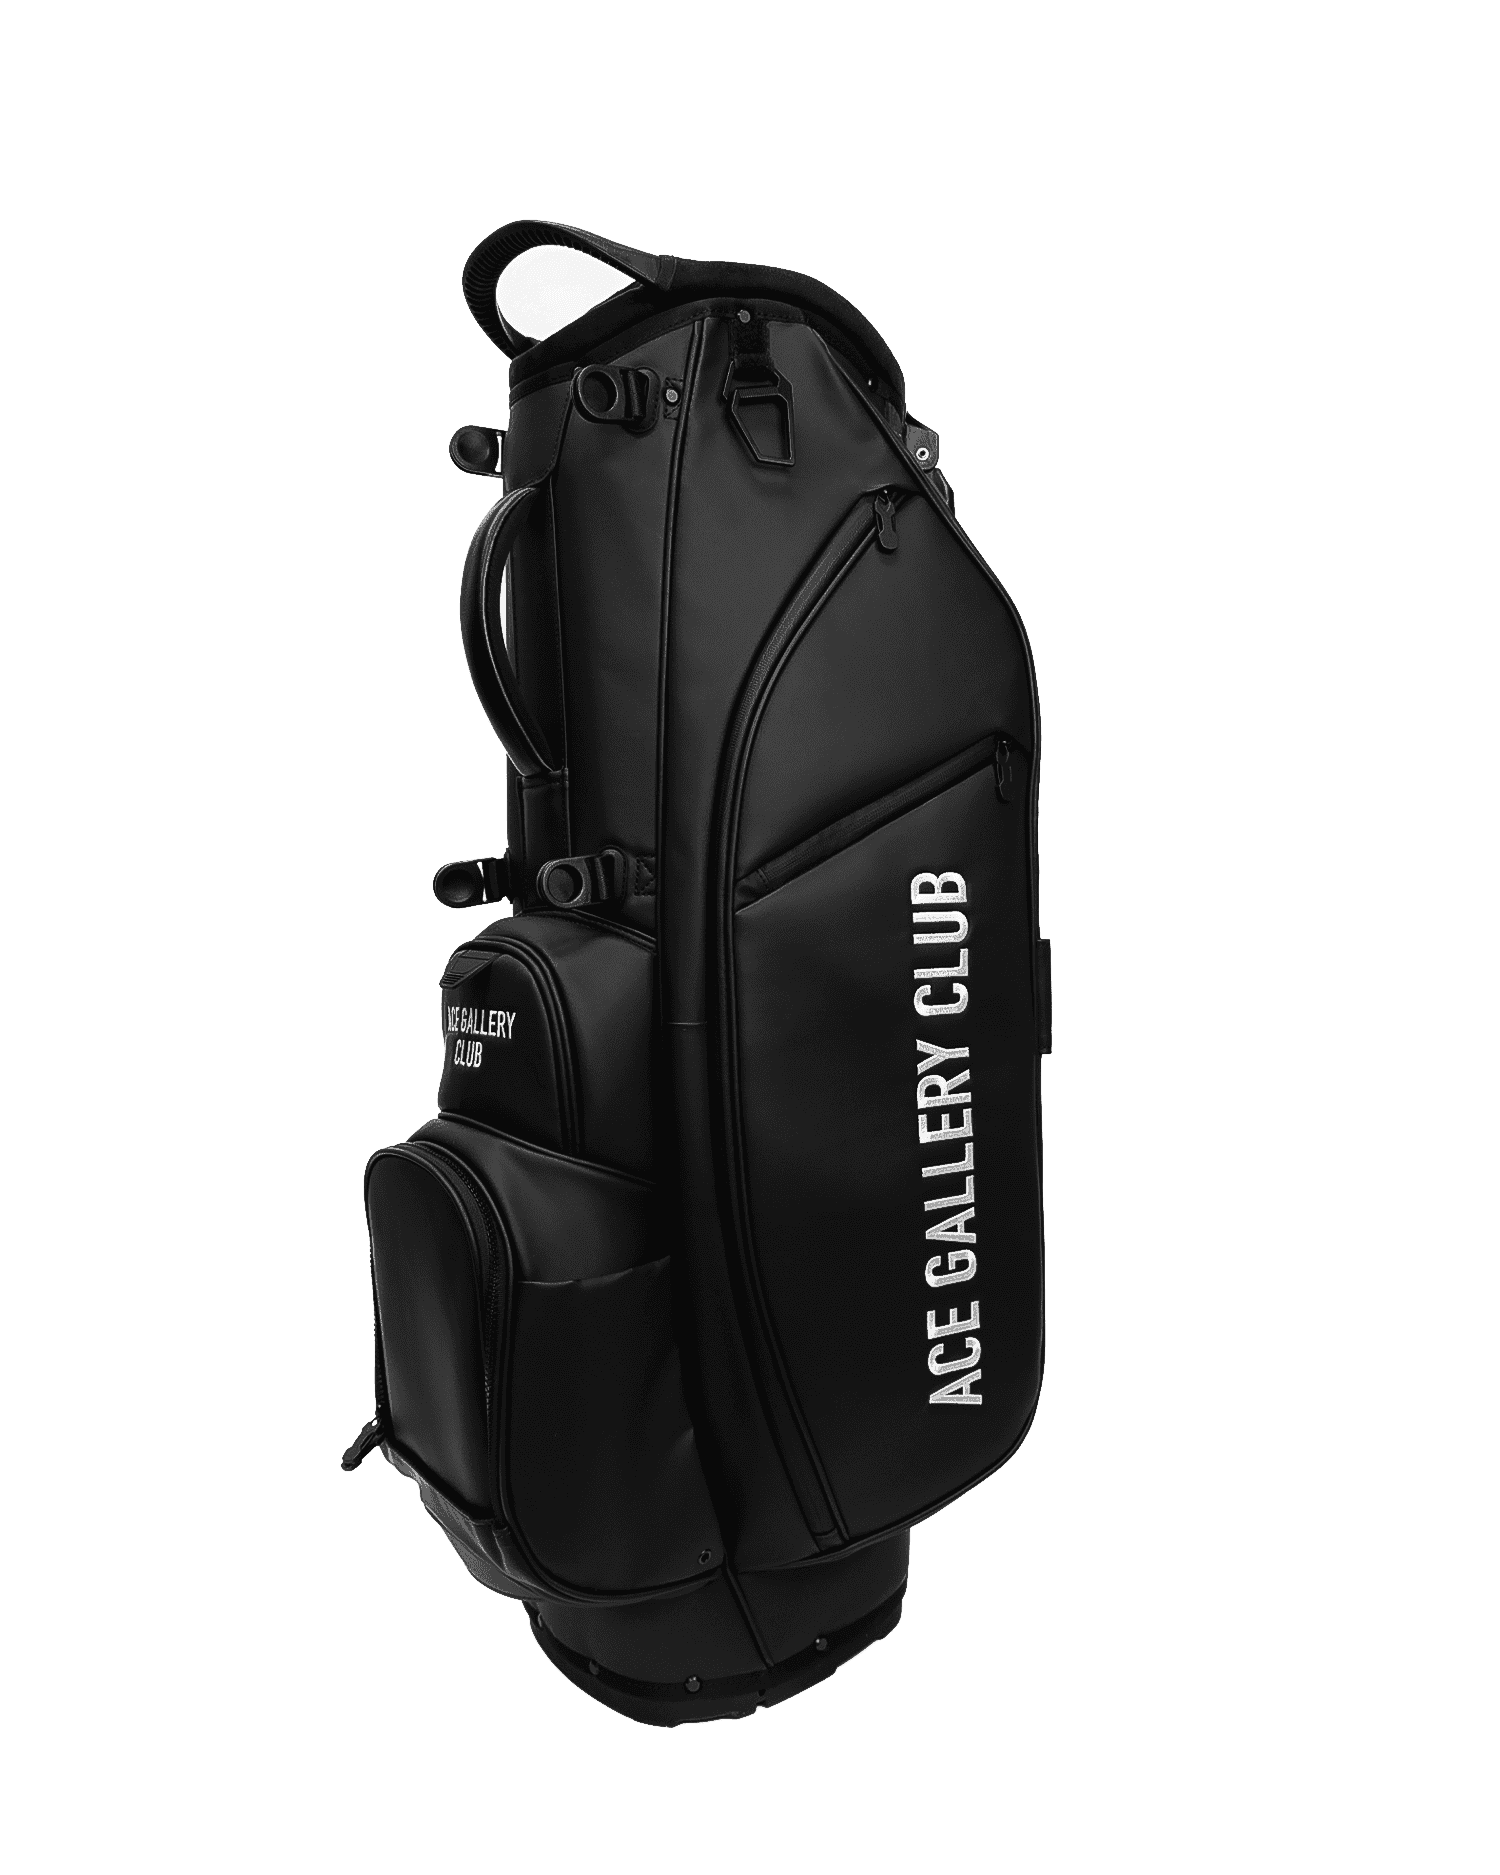 ACE GALLERY CLUB STAND BAG - BLACK